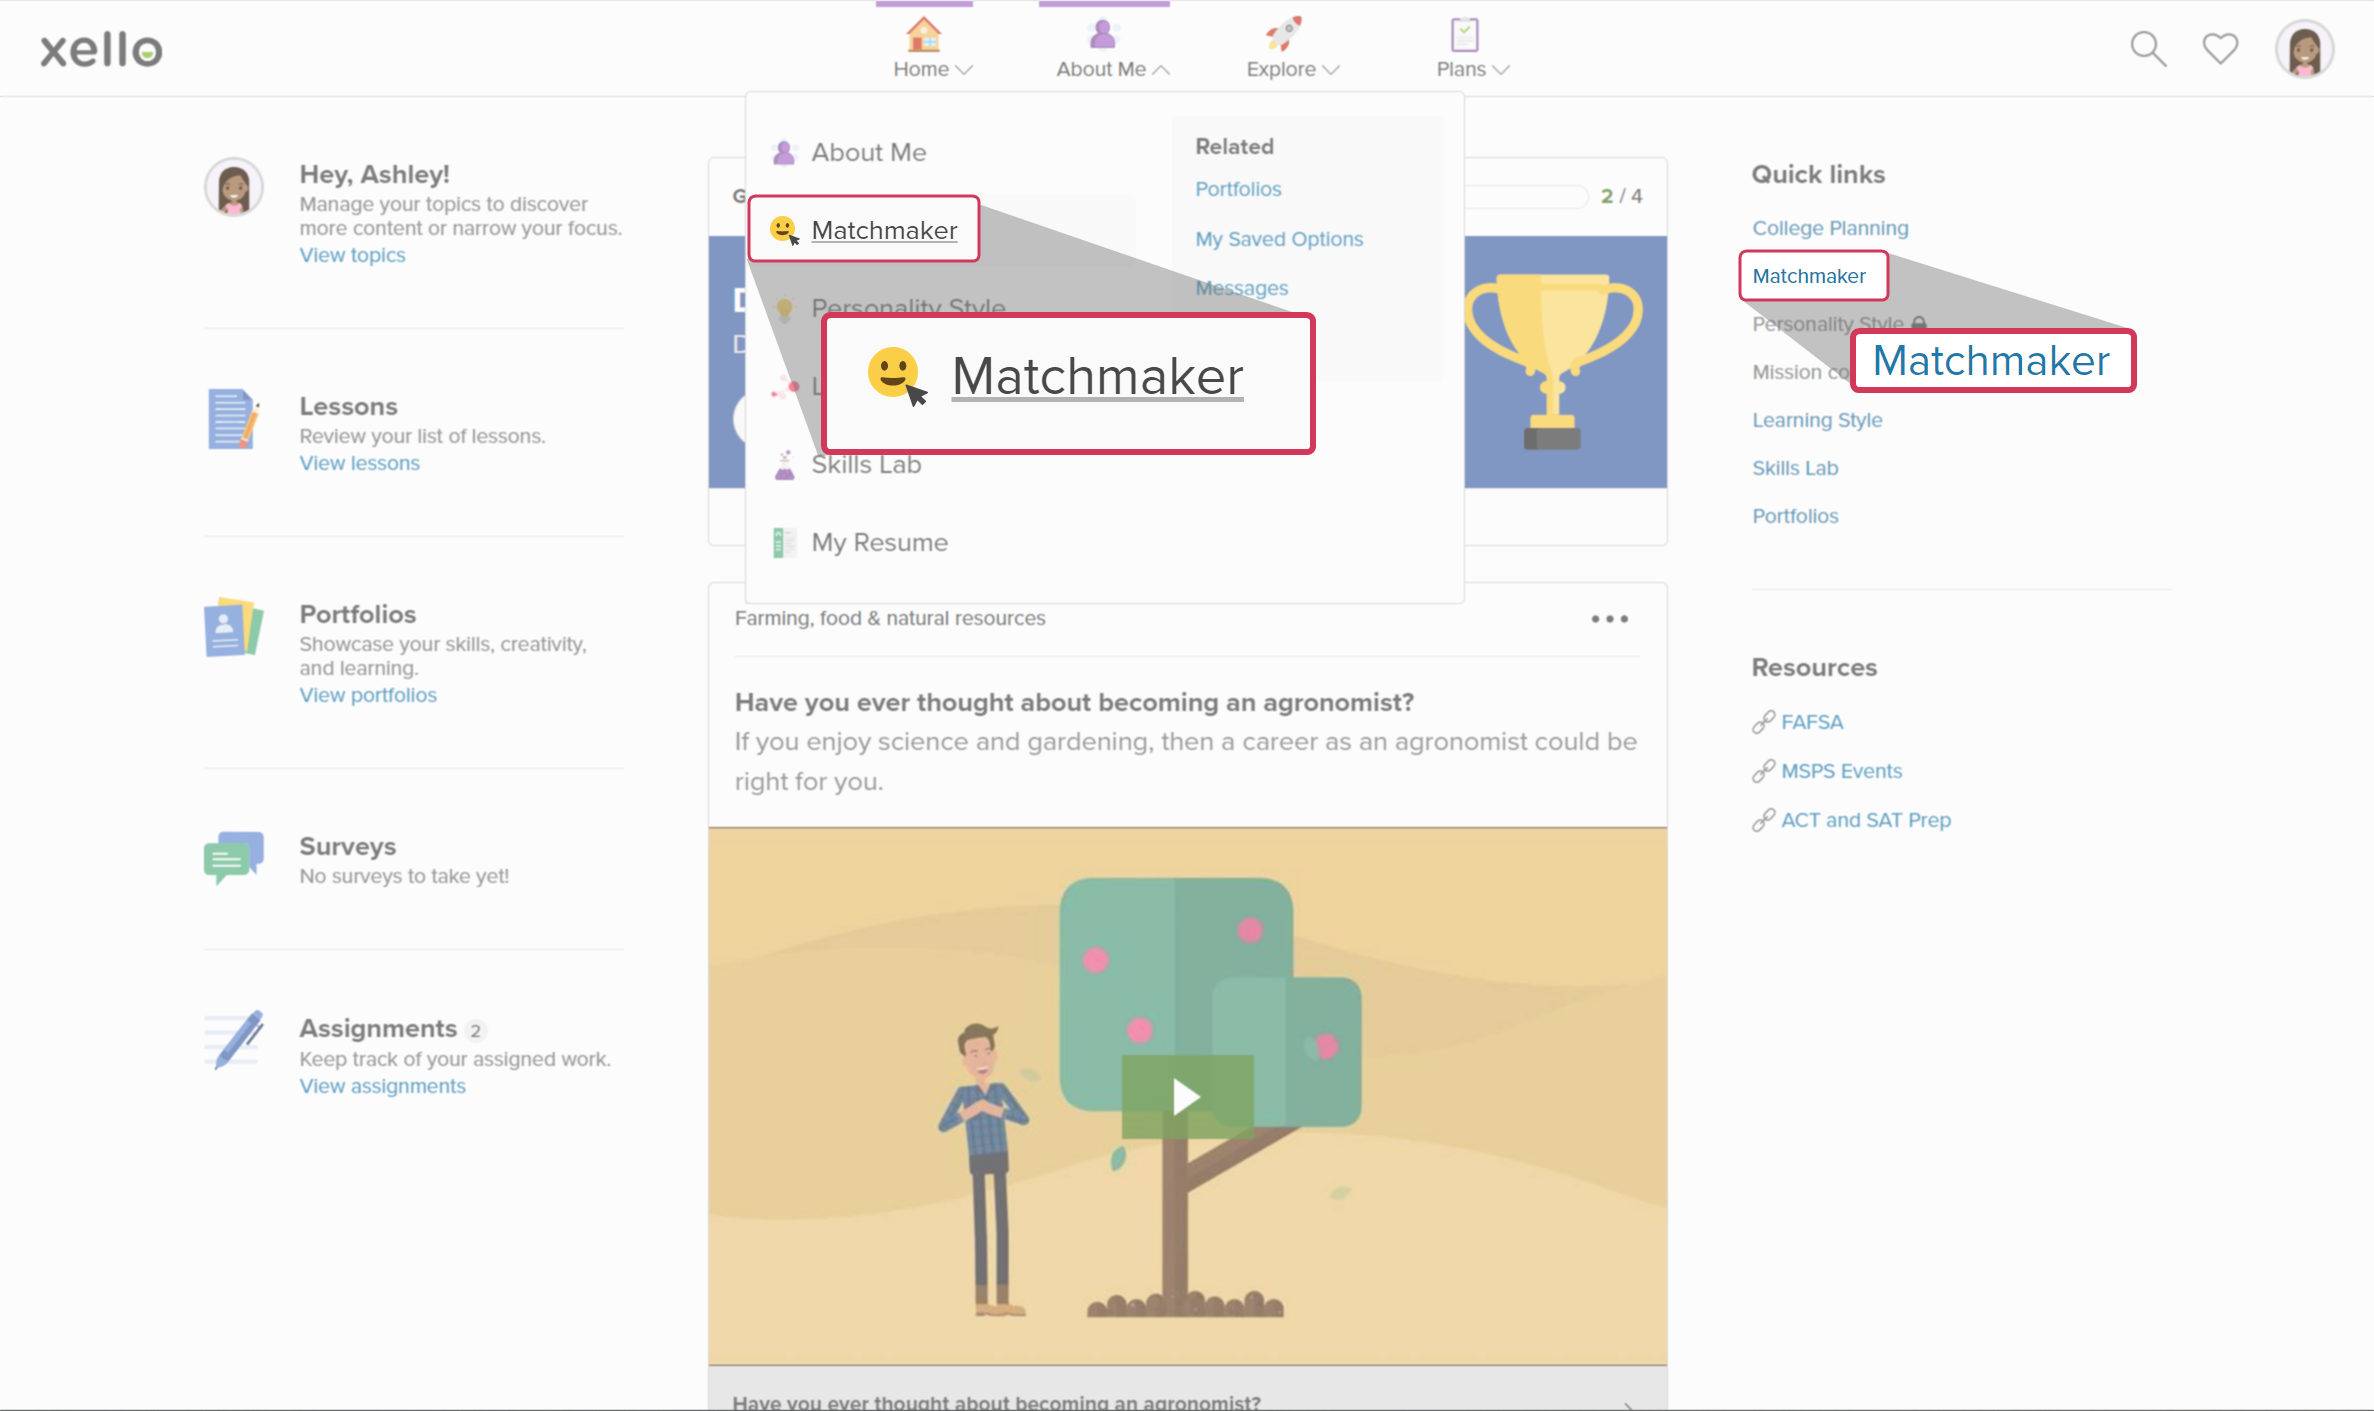 Access Matchmaker from the student dashboard